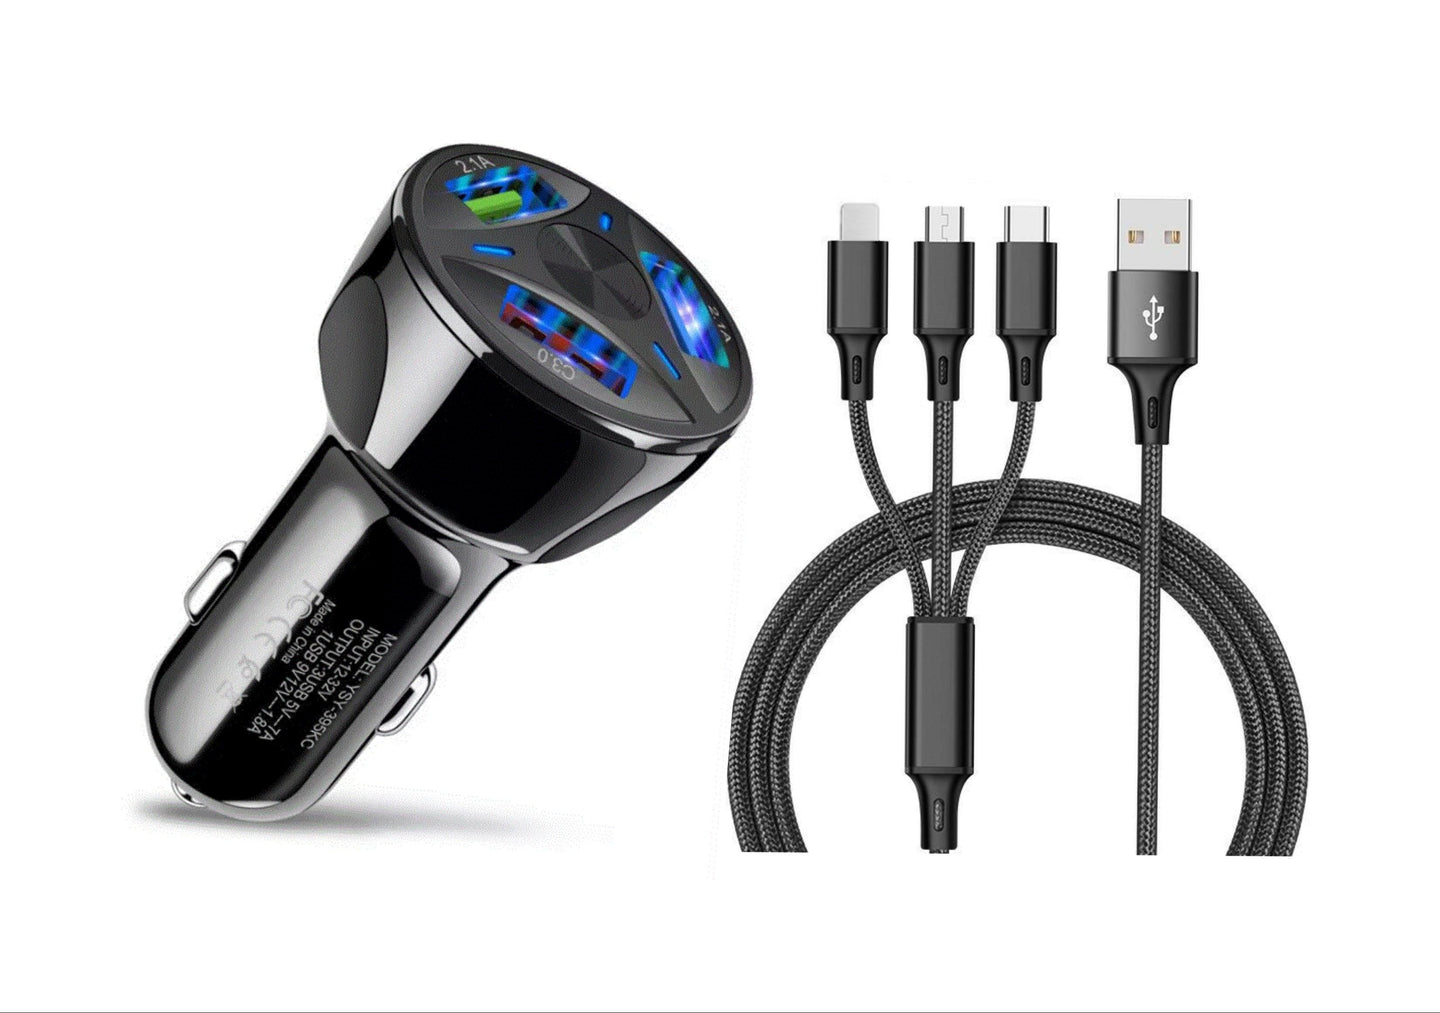 3 Port Fast LED Car Charger + 3 in 1 Cable Combo Black - PremiumBrandGoods